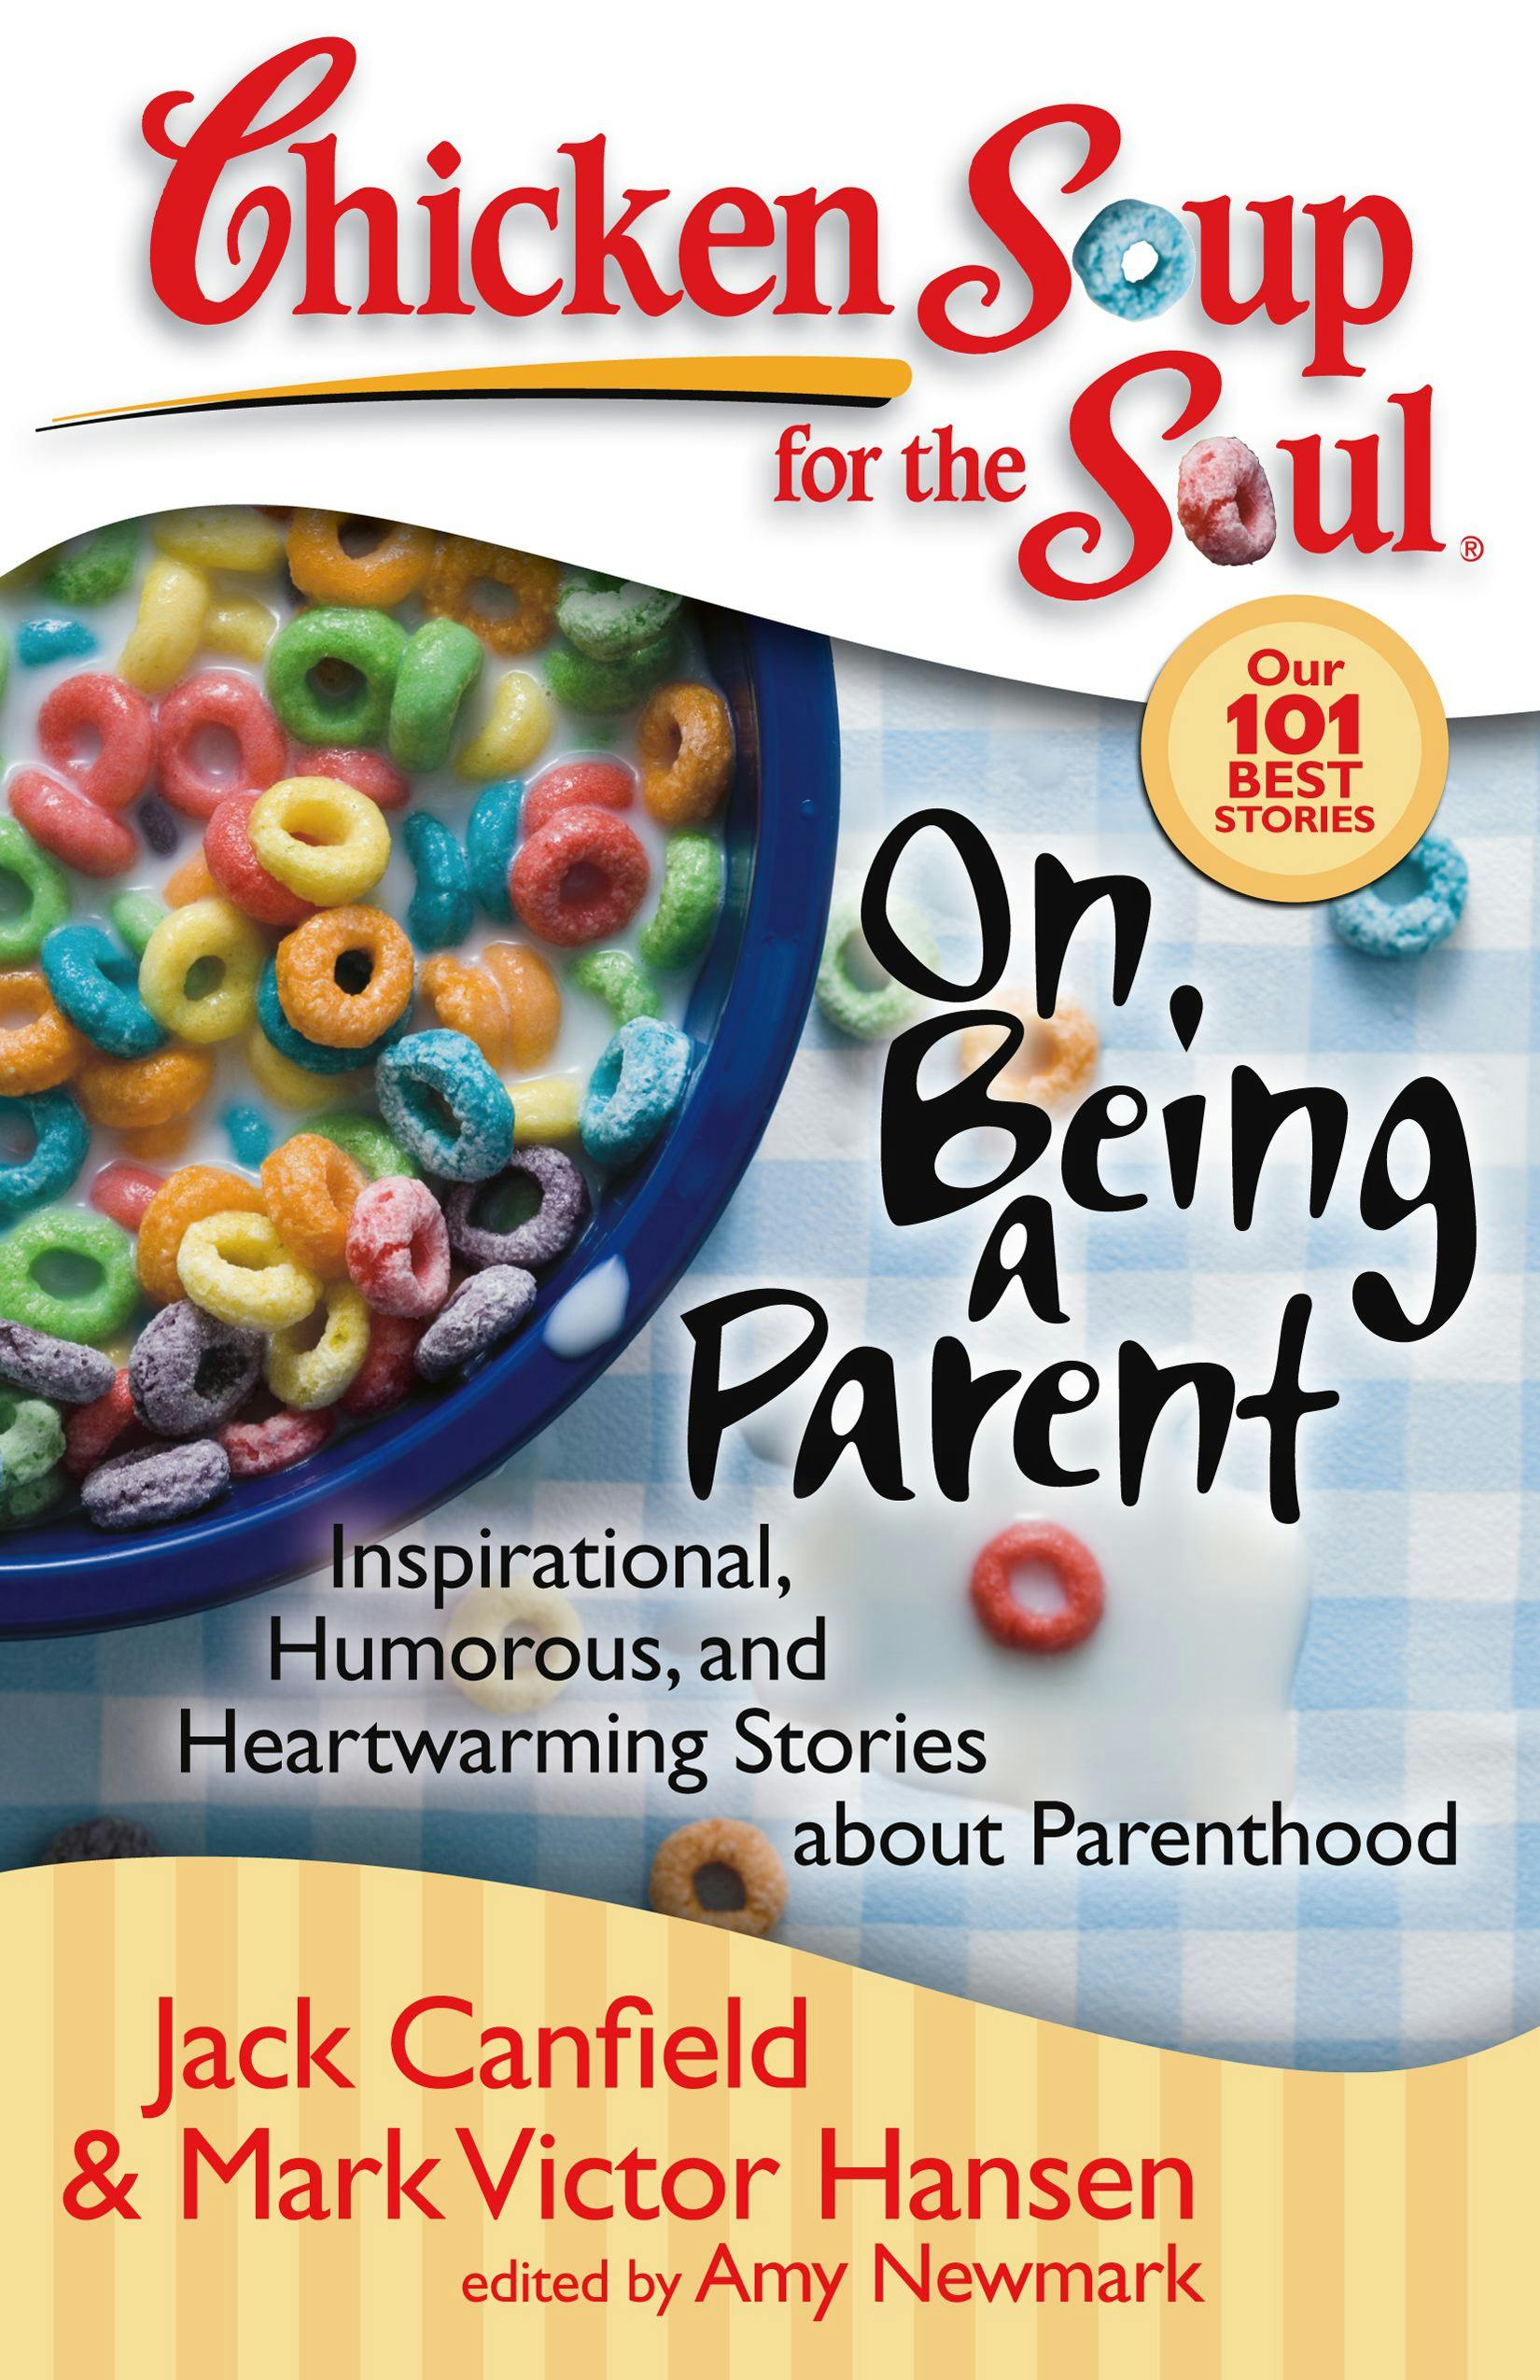 Chicken Soup for the Soul: On Being a Parent: Inspirational, Humorous, and Heartwarming Stories about Parenthood - Mark Victor Hansen, Jack Canfield, Amy Newmark